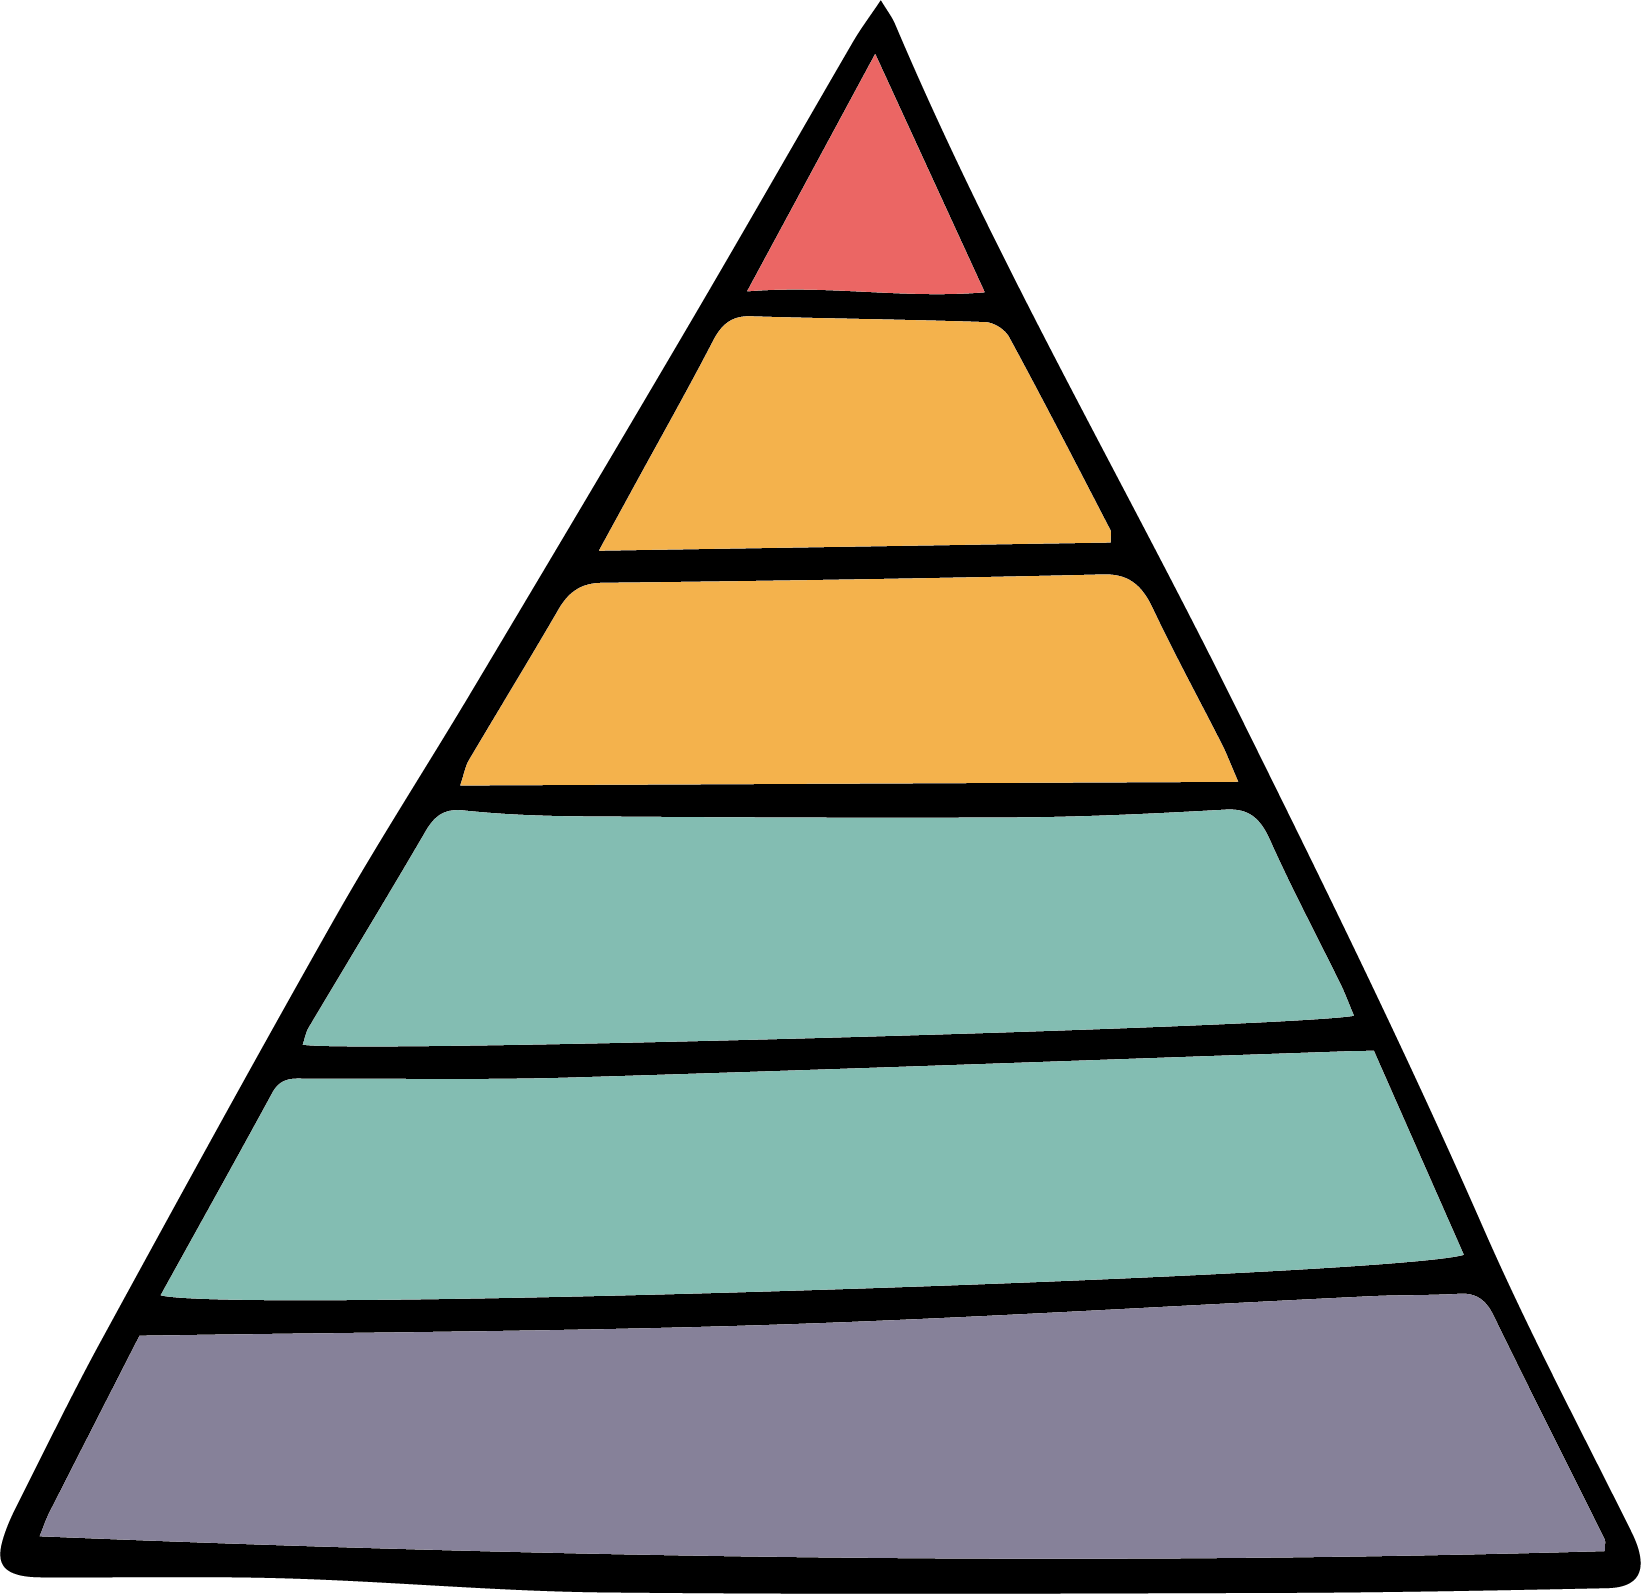 United States Maslows Hierarchy - United States Maslows Hierarchy (1641x1594)